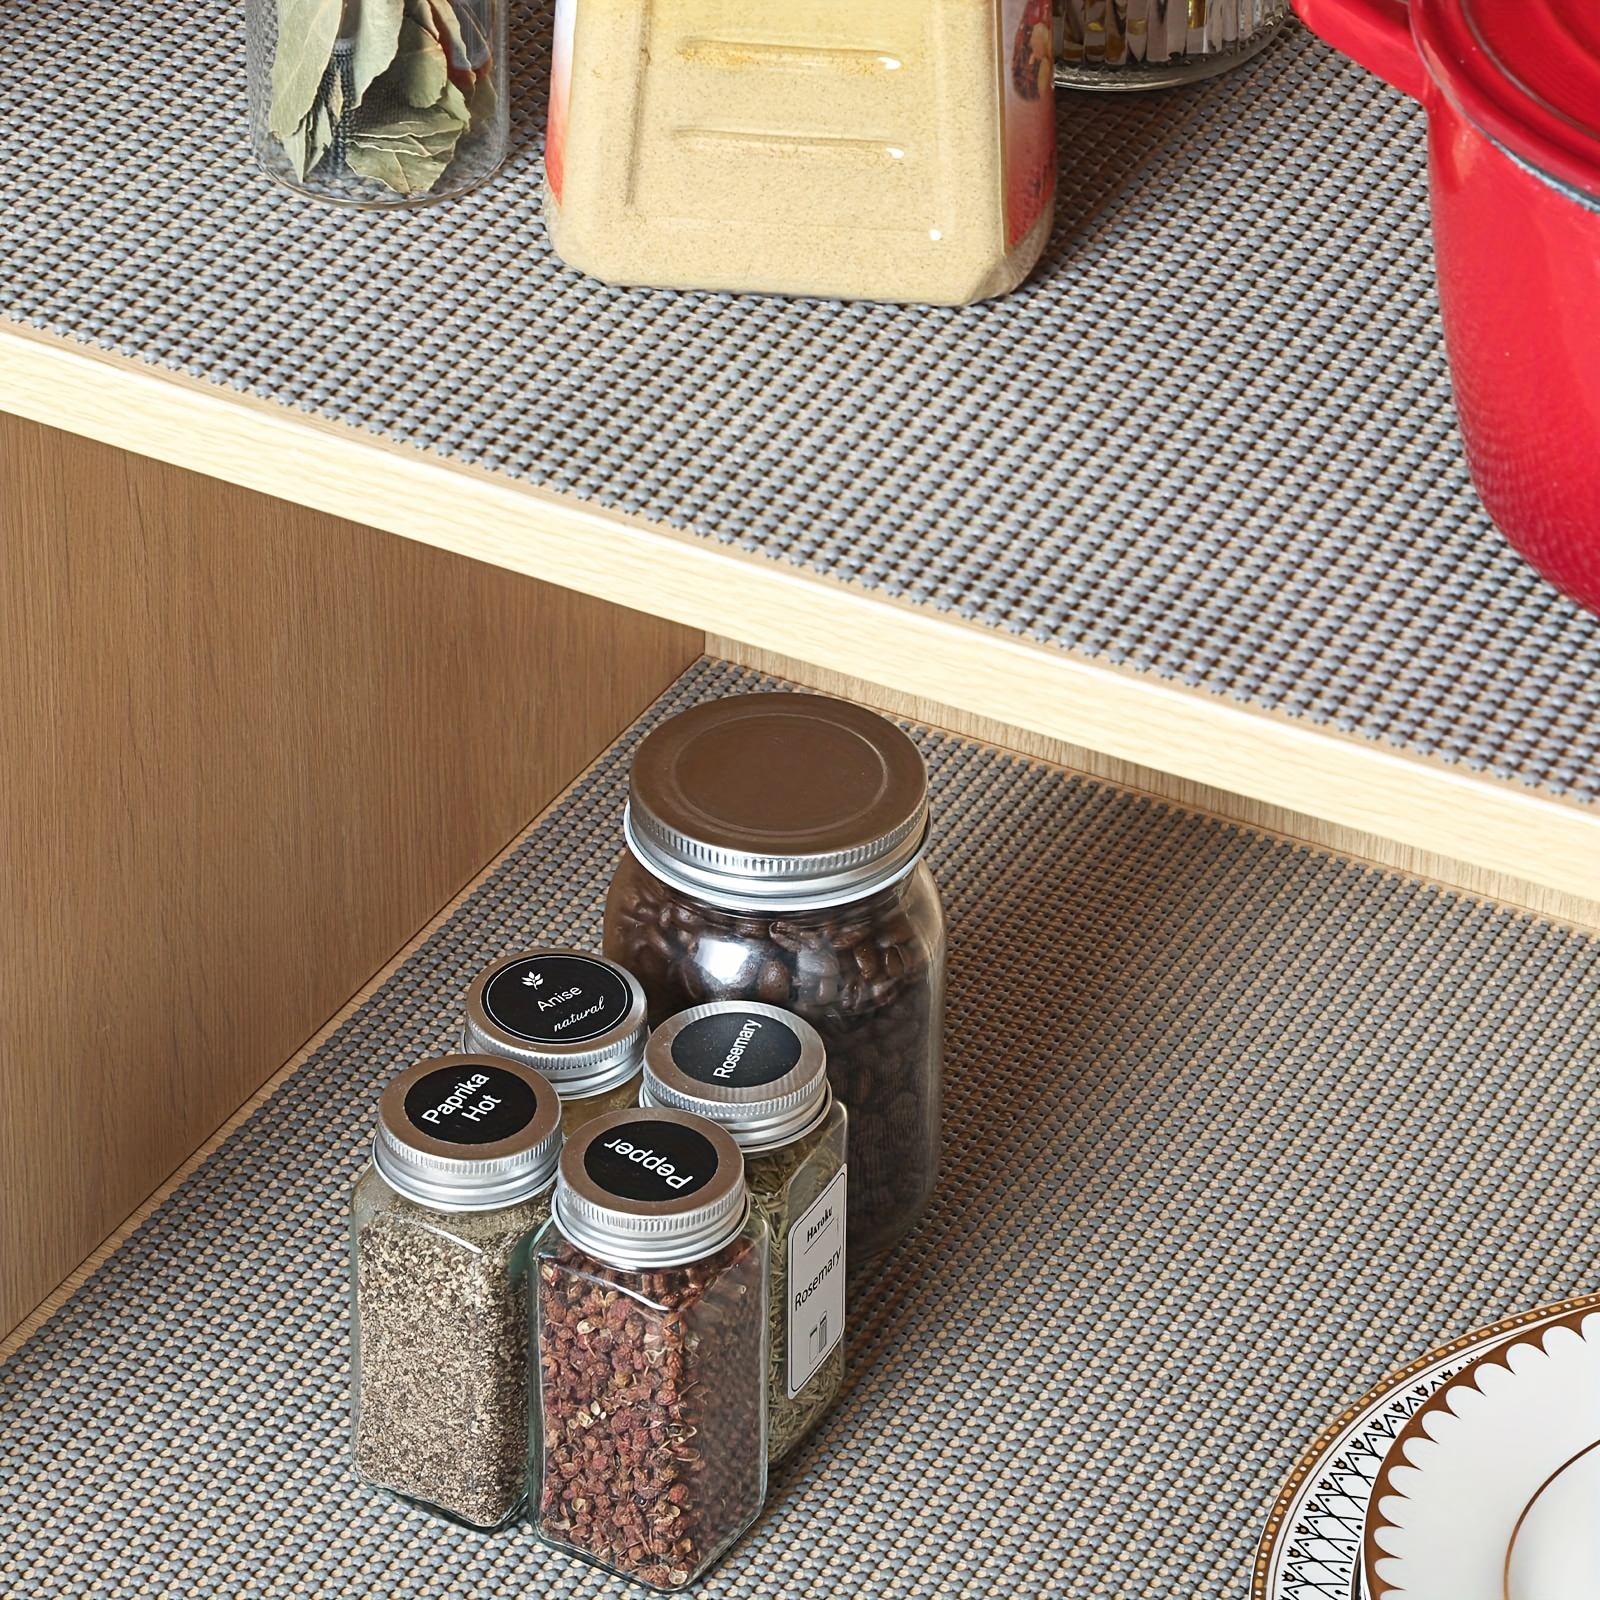 Non-slip Shelf Liner - Durable, Adjustable, And Free-cutting For